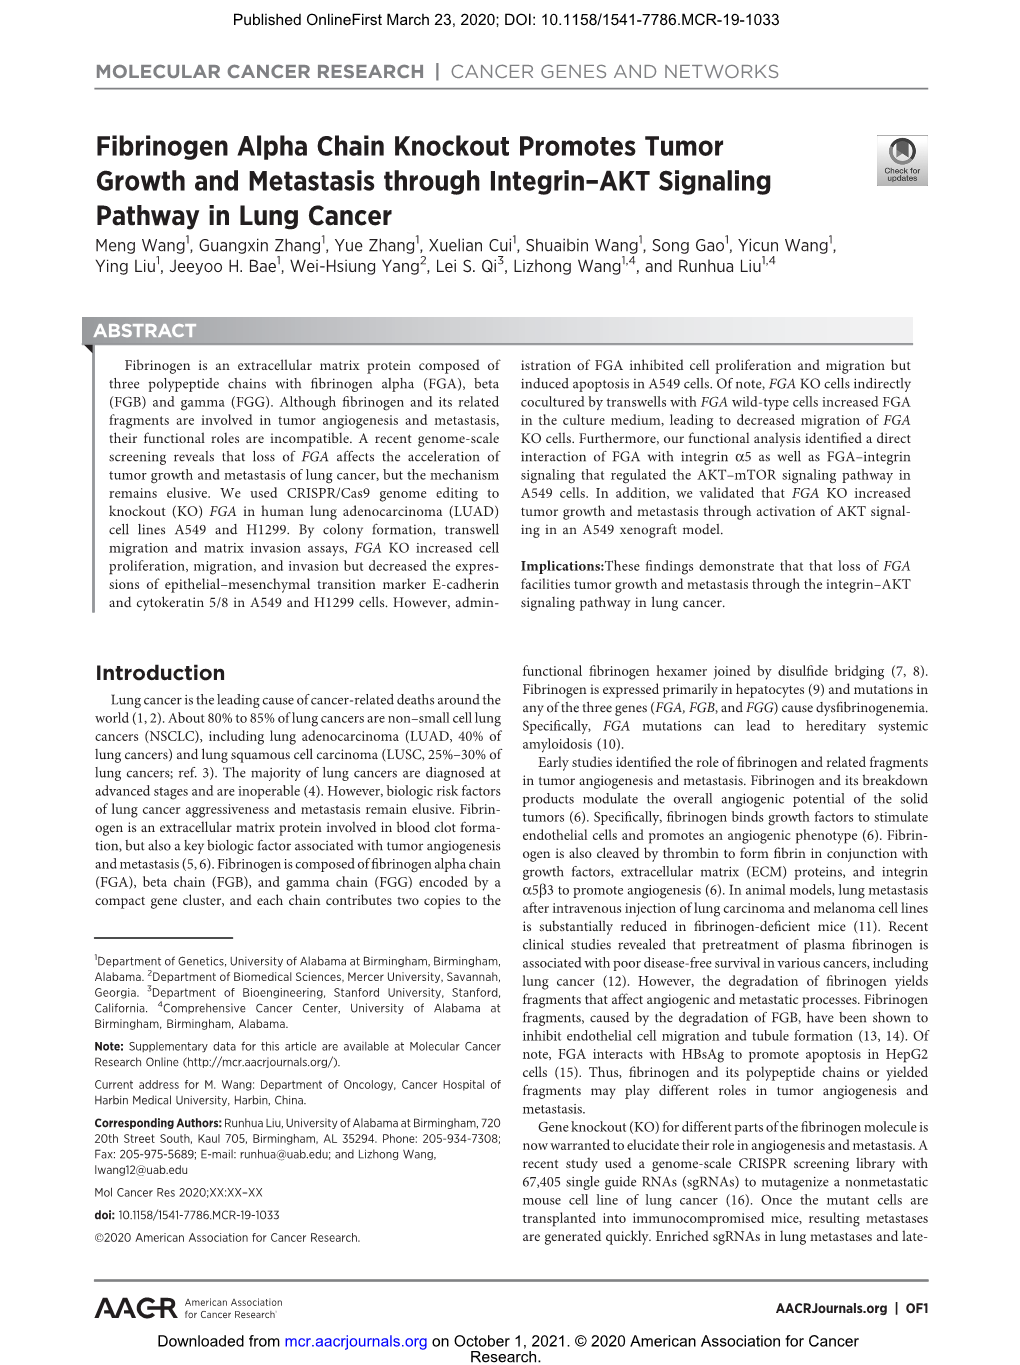 Fibrinogen Alpha Chain Knockout Promotes Tumor Growth And